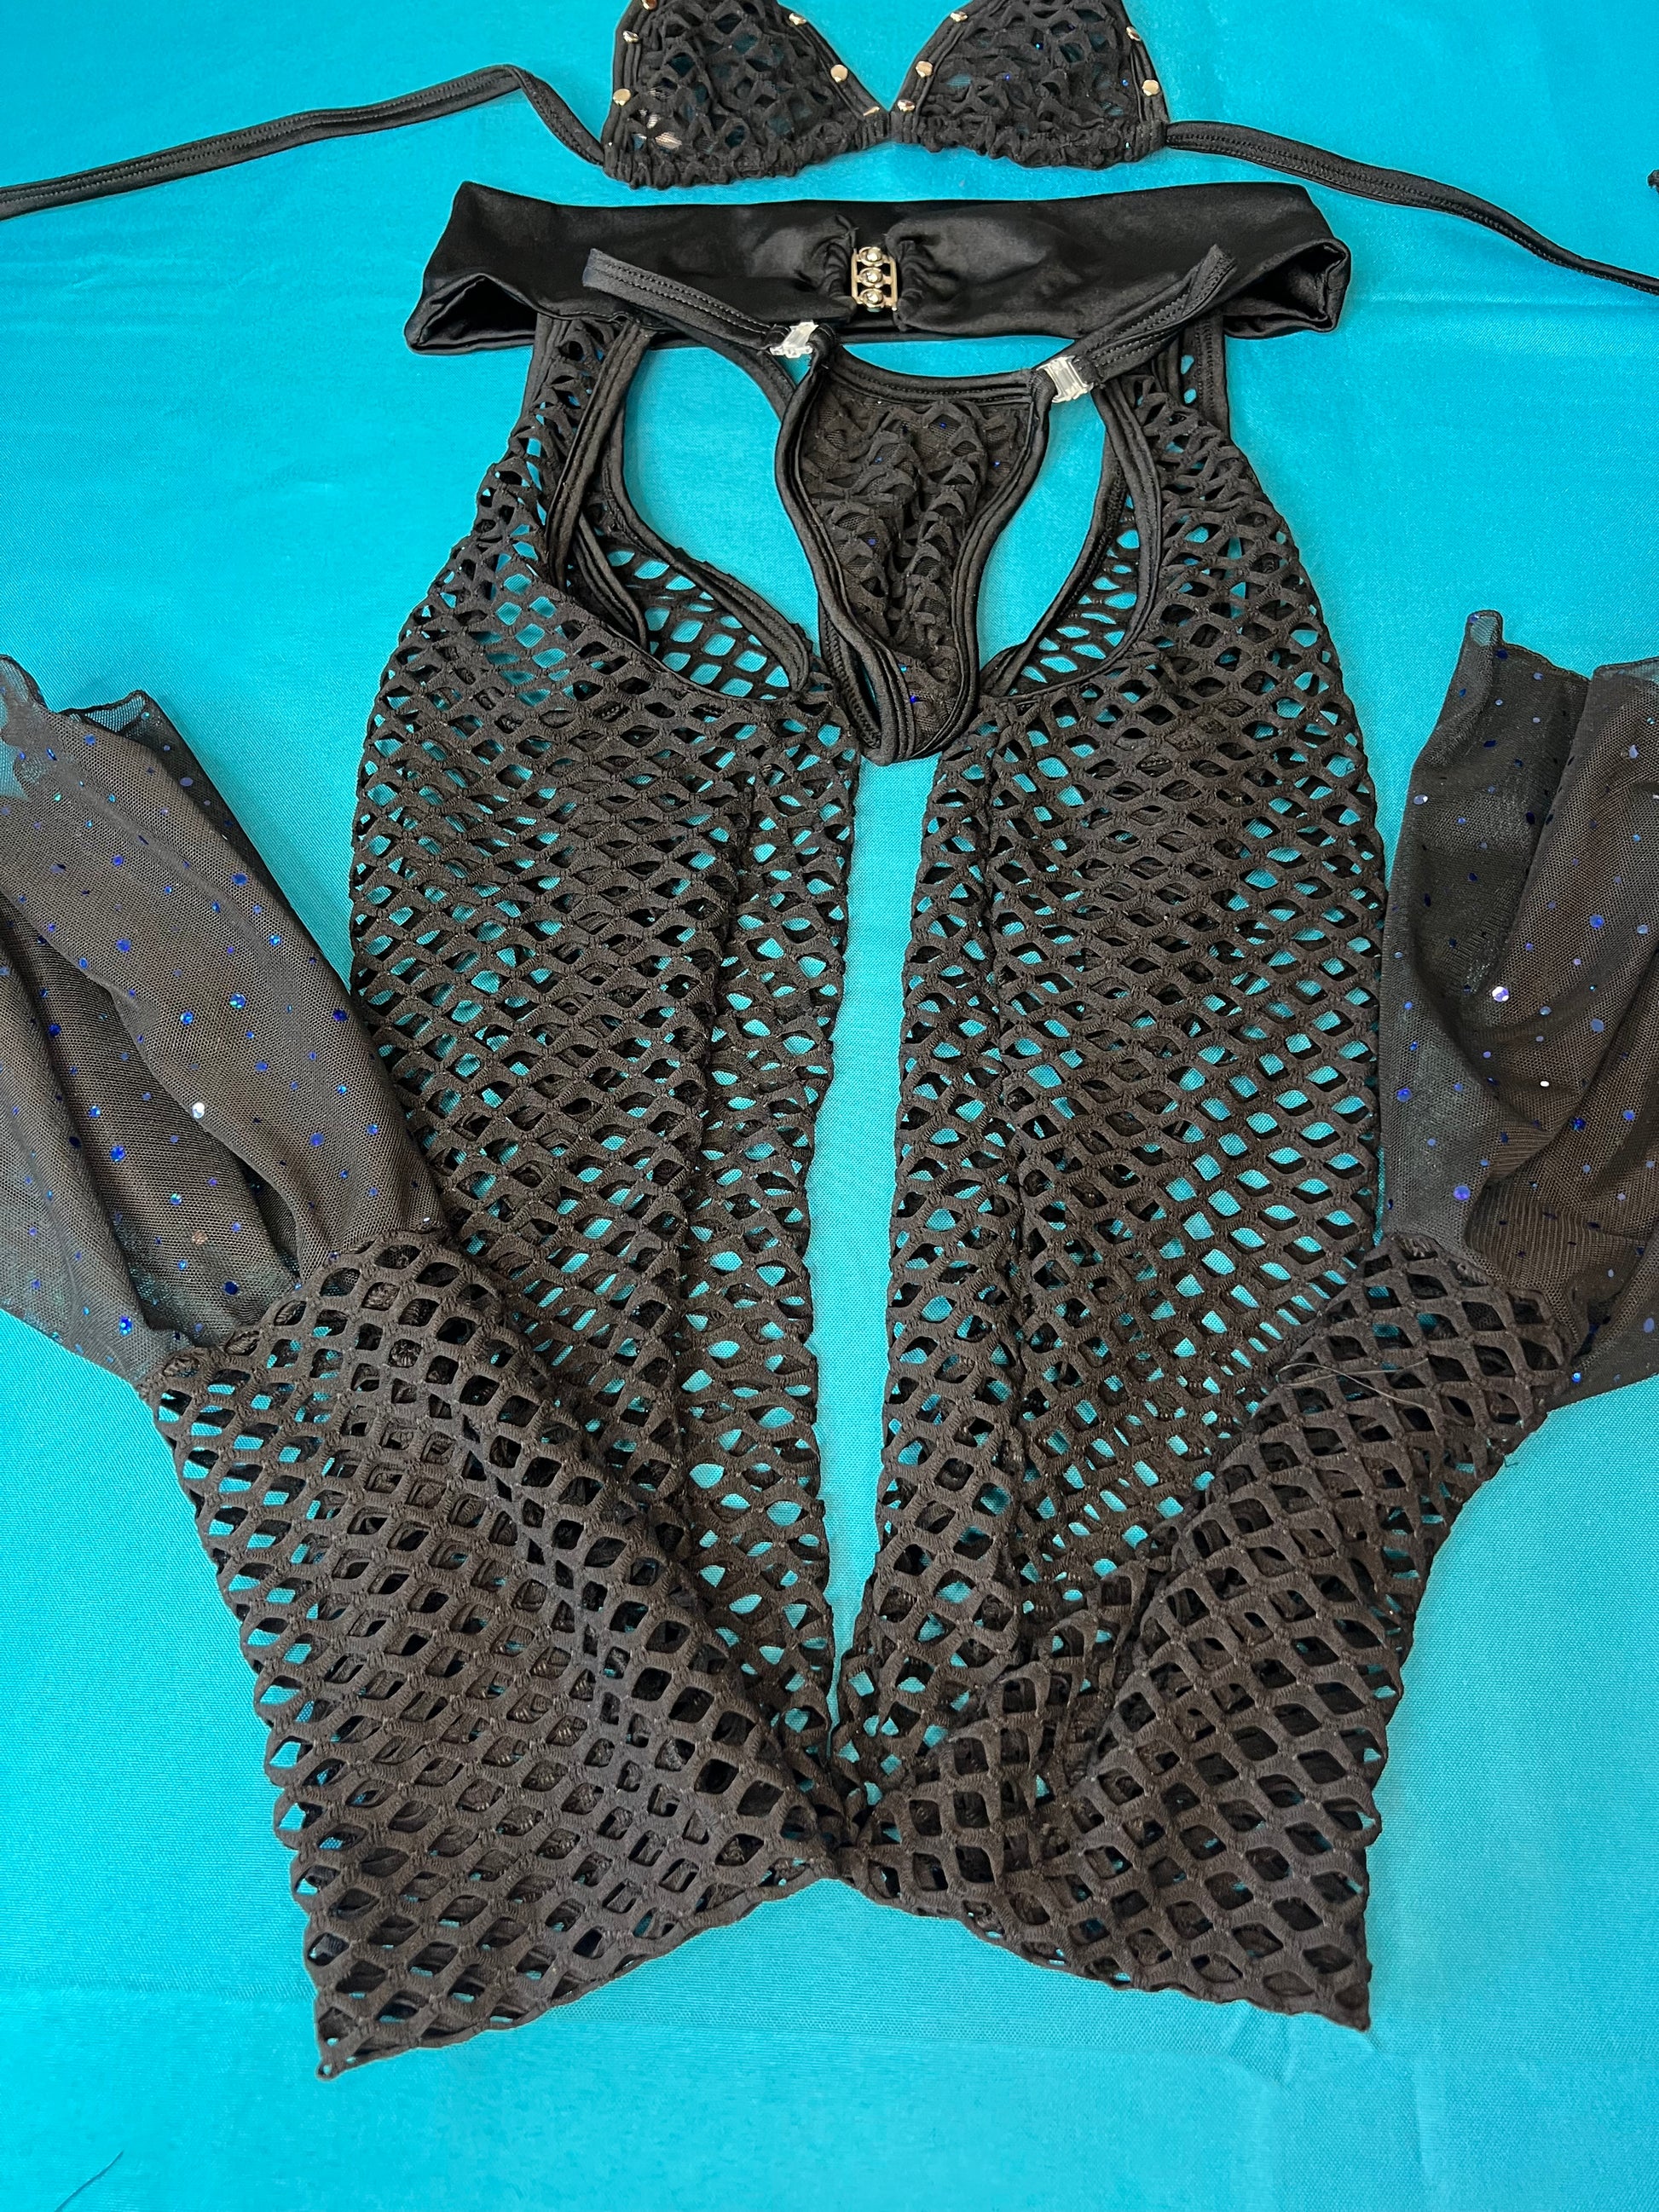 exotic dance wear/stripping outfit